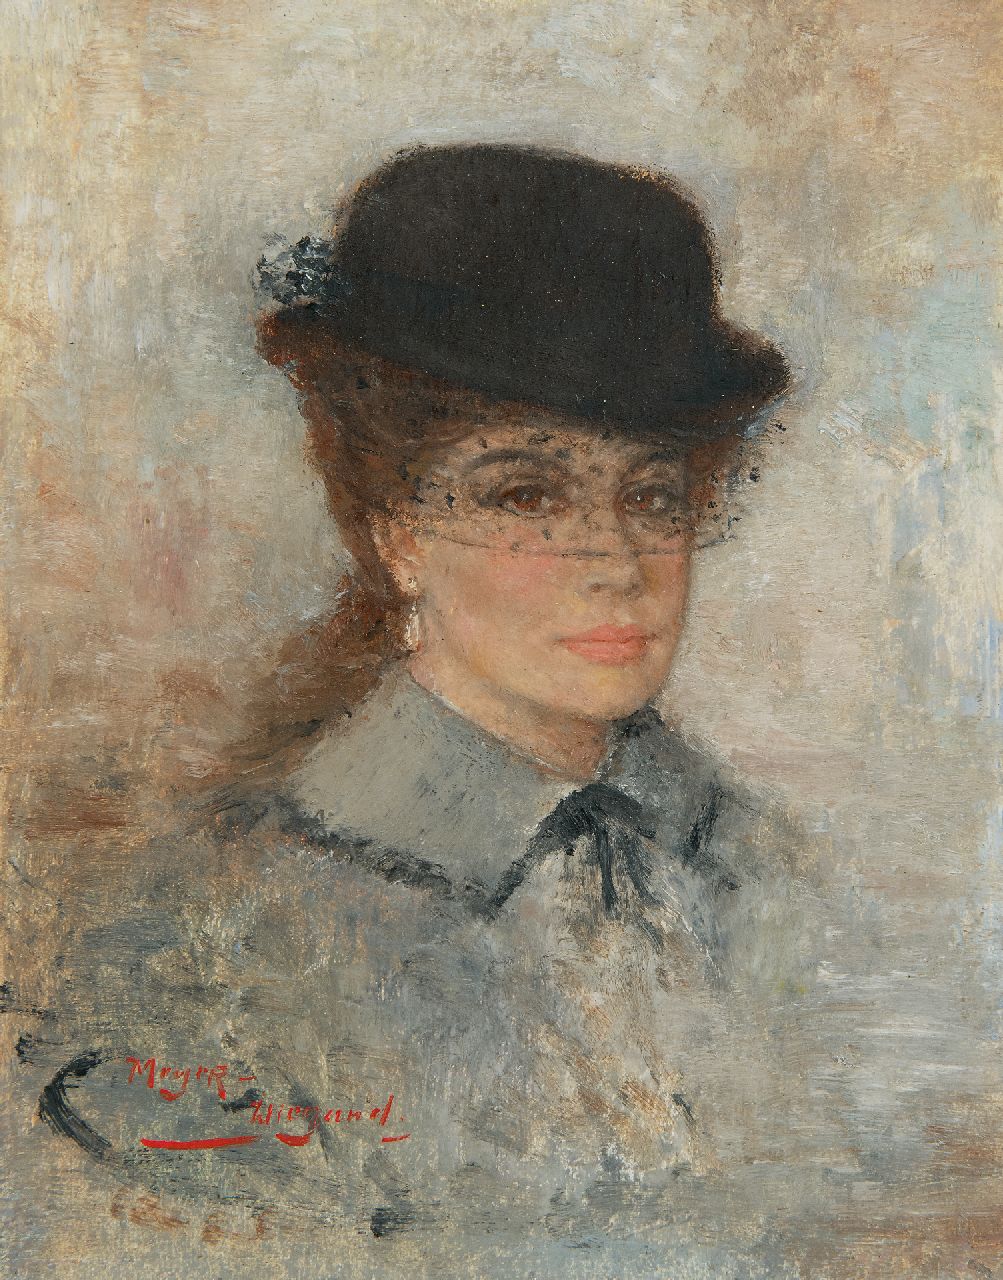 Meyer-Wiegand R.D.  | Rolf Dieter Meyer-Wiegand | Paintings offered for sale | Woman with hat and voile, oil on panel 18.0 x 14.1 cm, signed l.l.